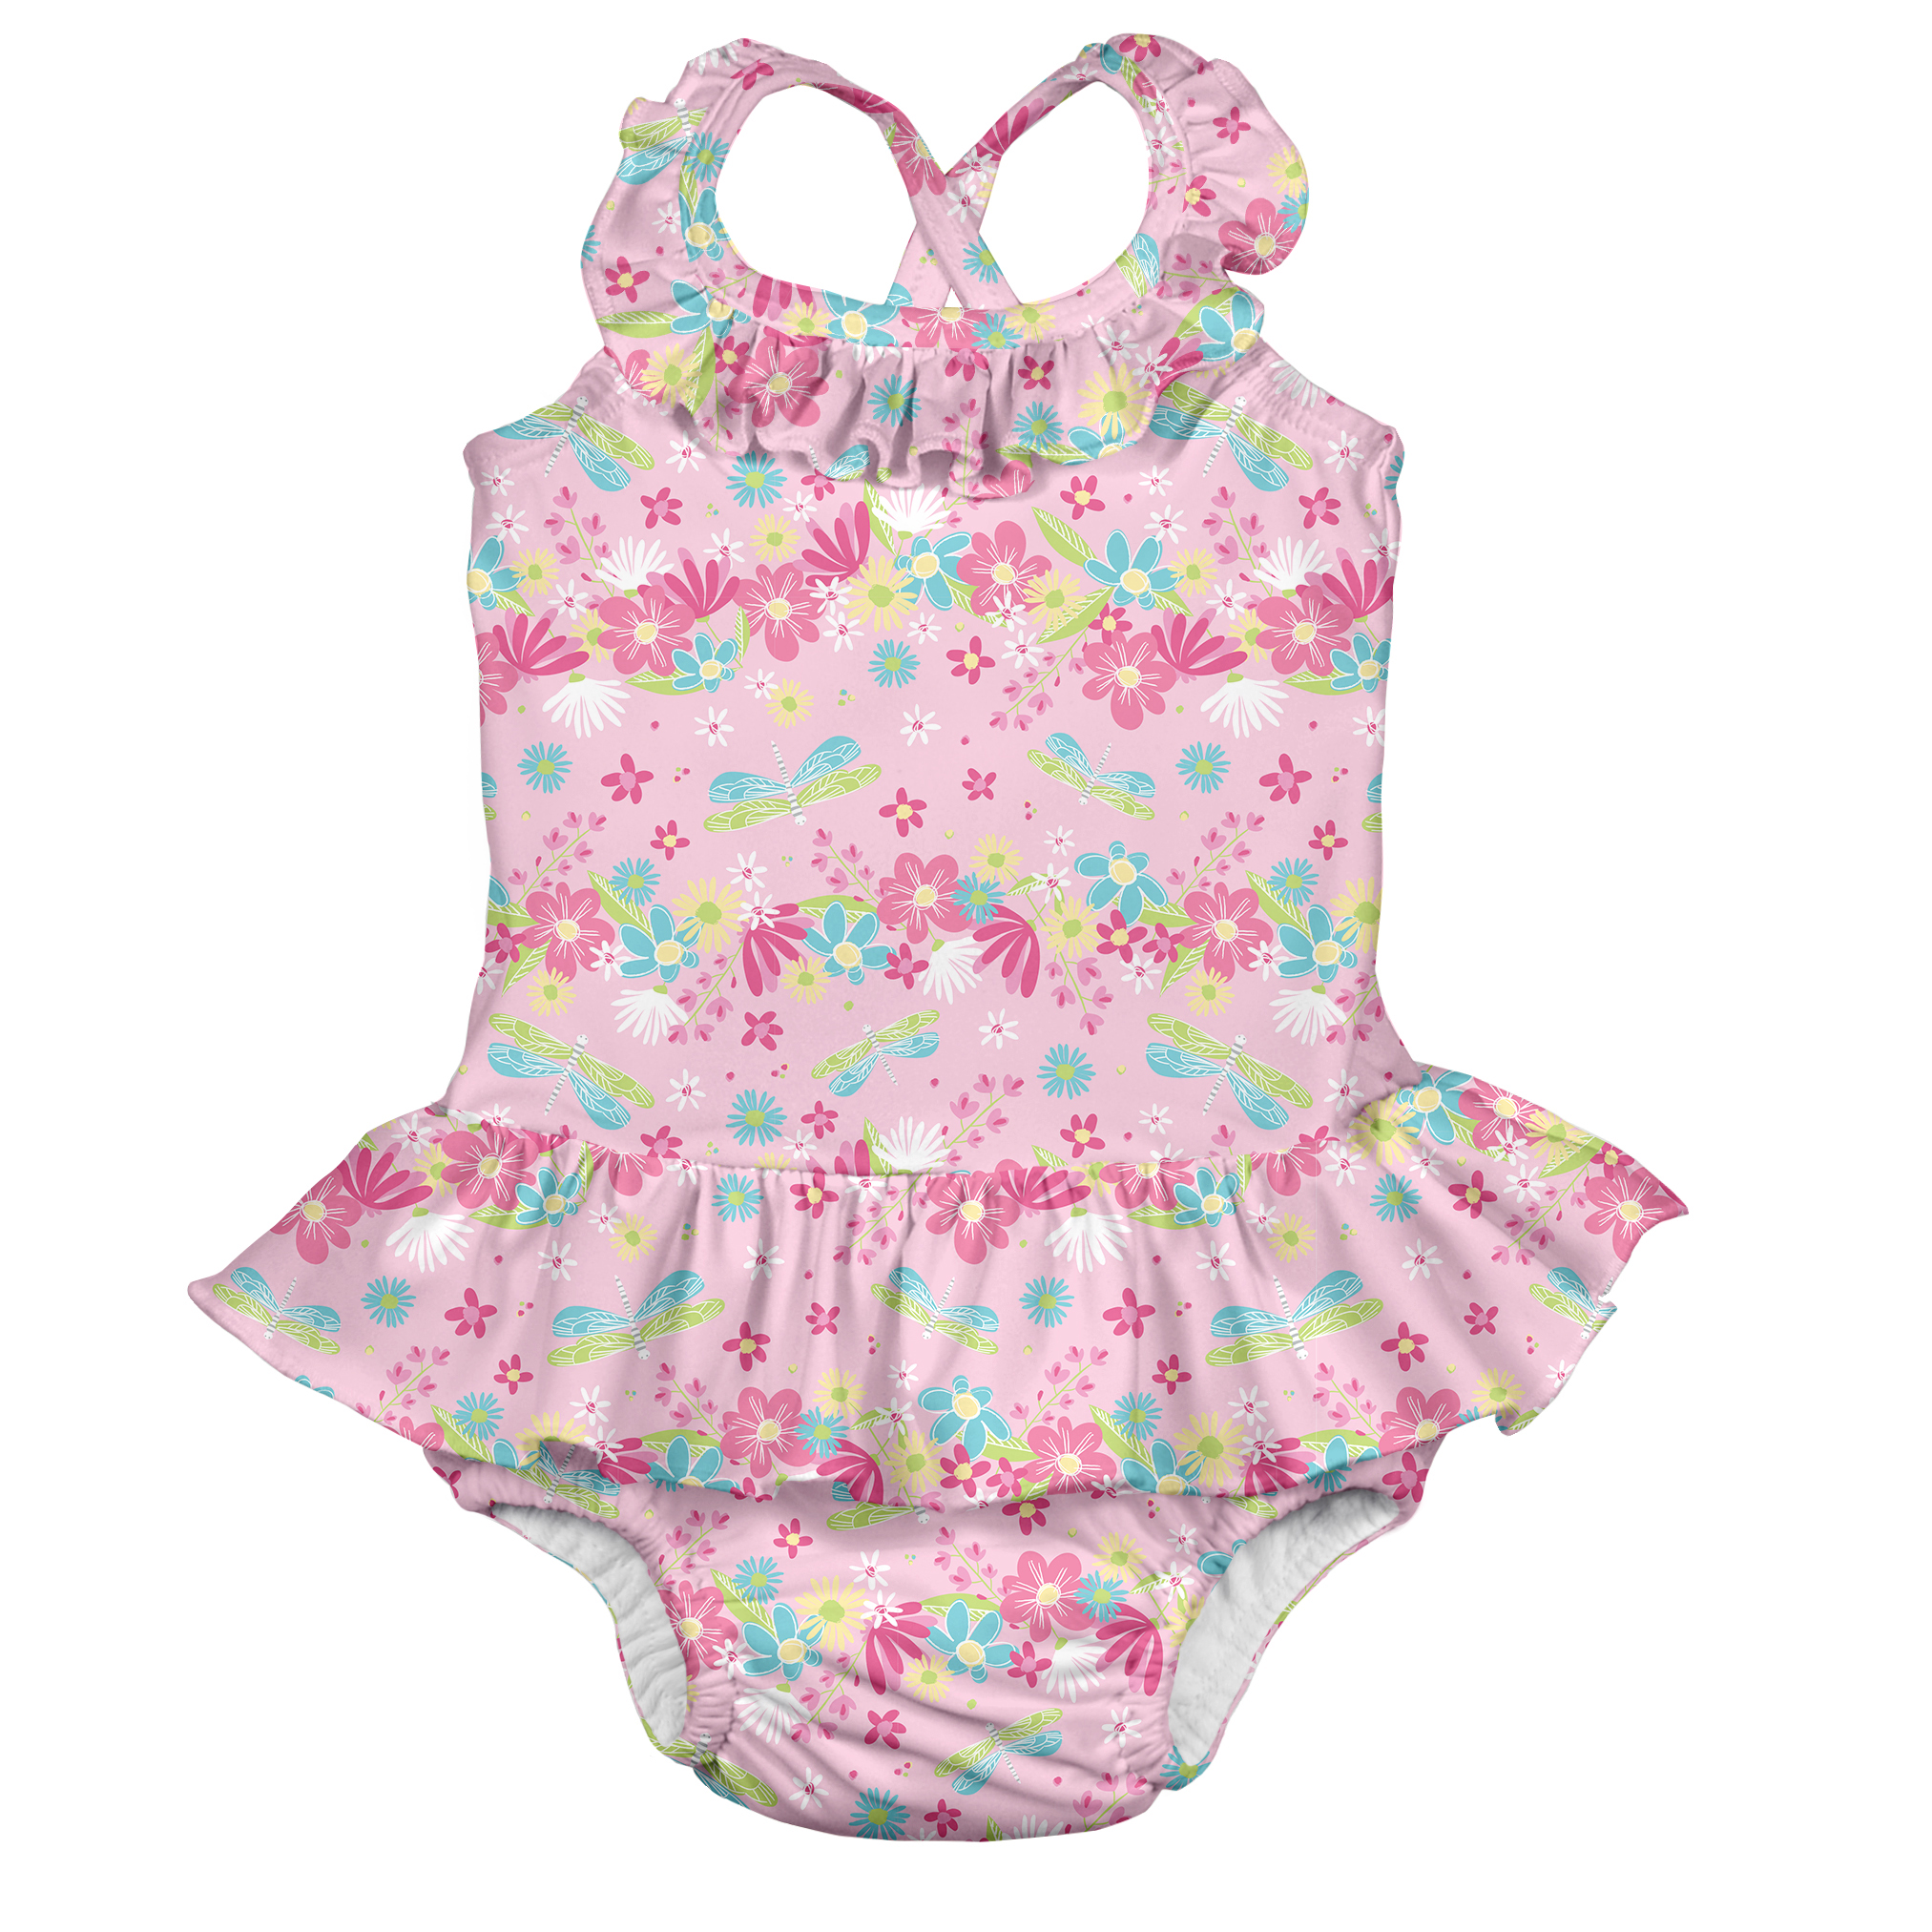 i play. Baby and Toddler Girls One-Piece Swimsuit with Built-in Reusable Absorbent Diaper - image 1 of 4